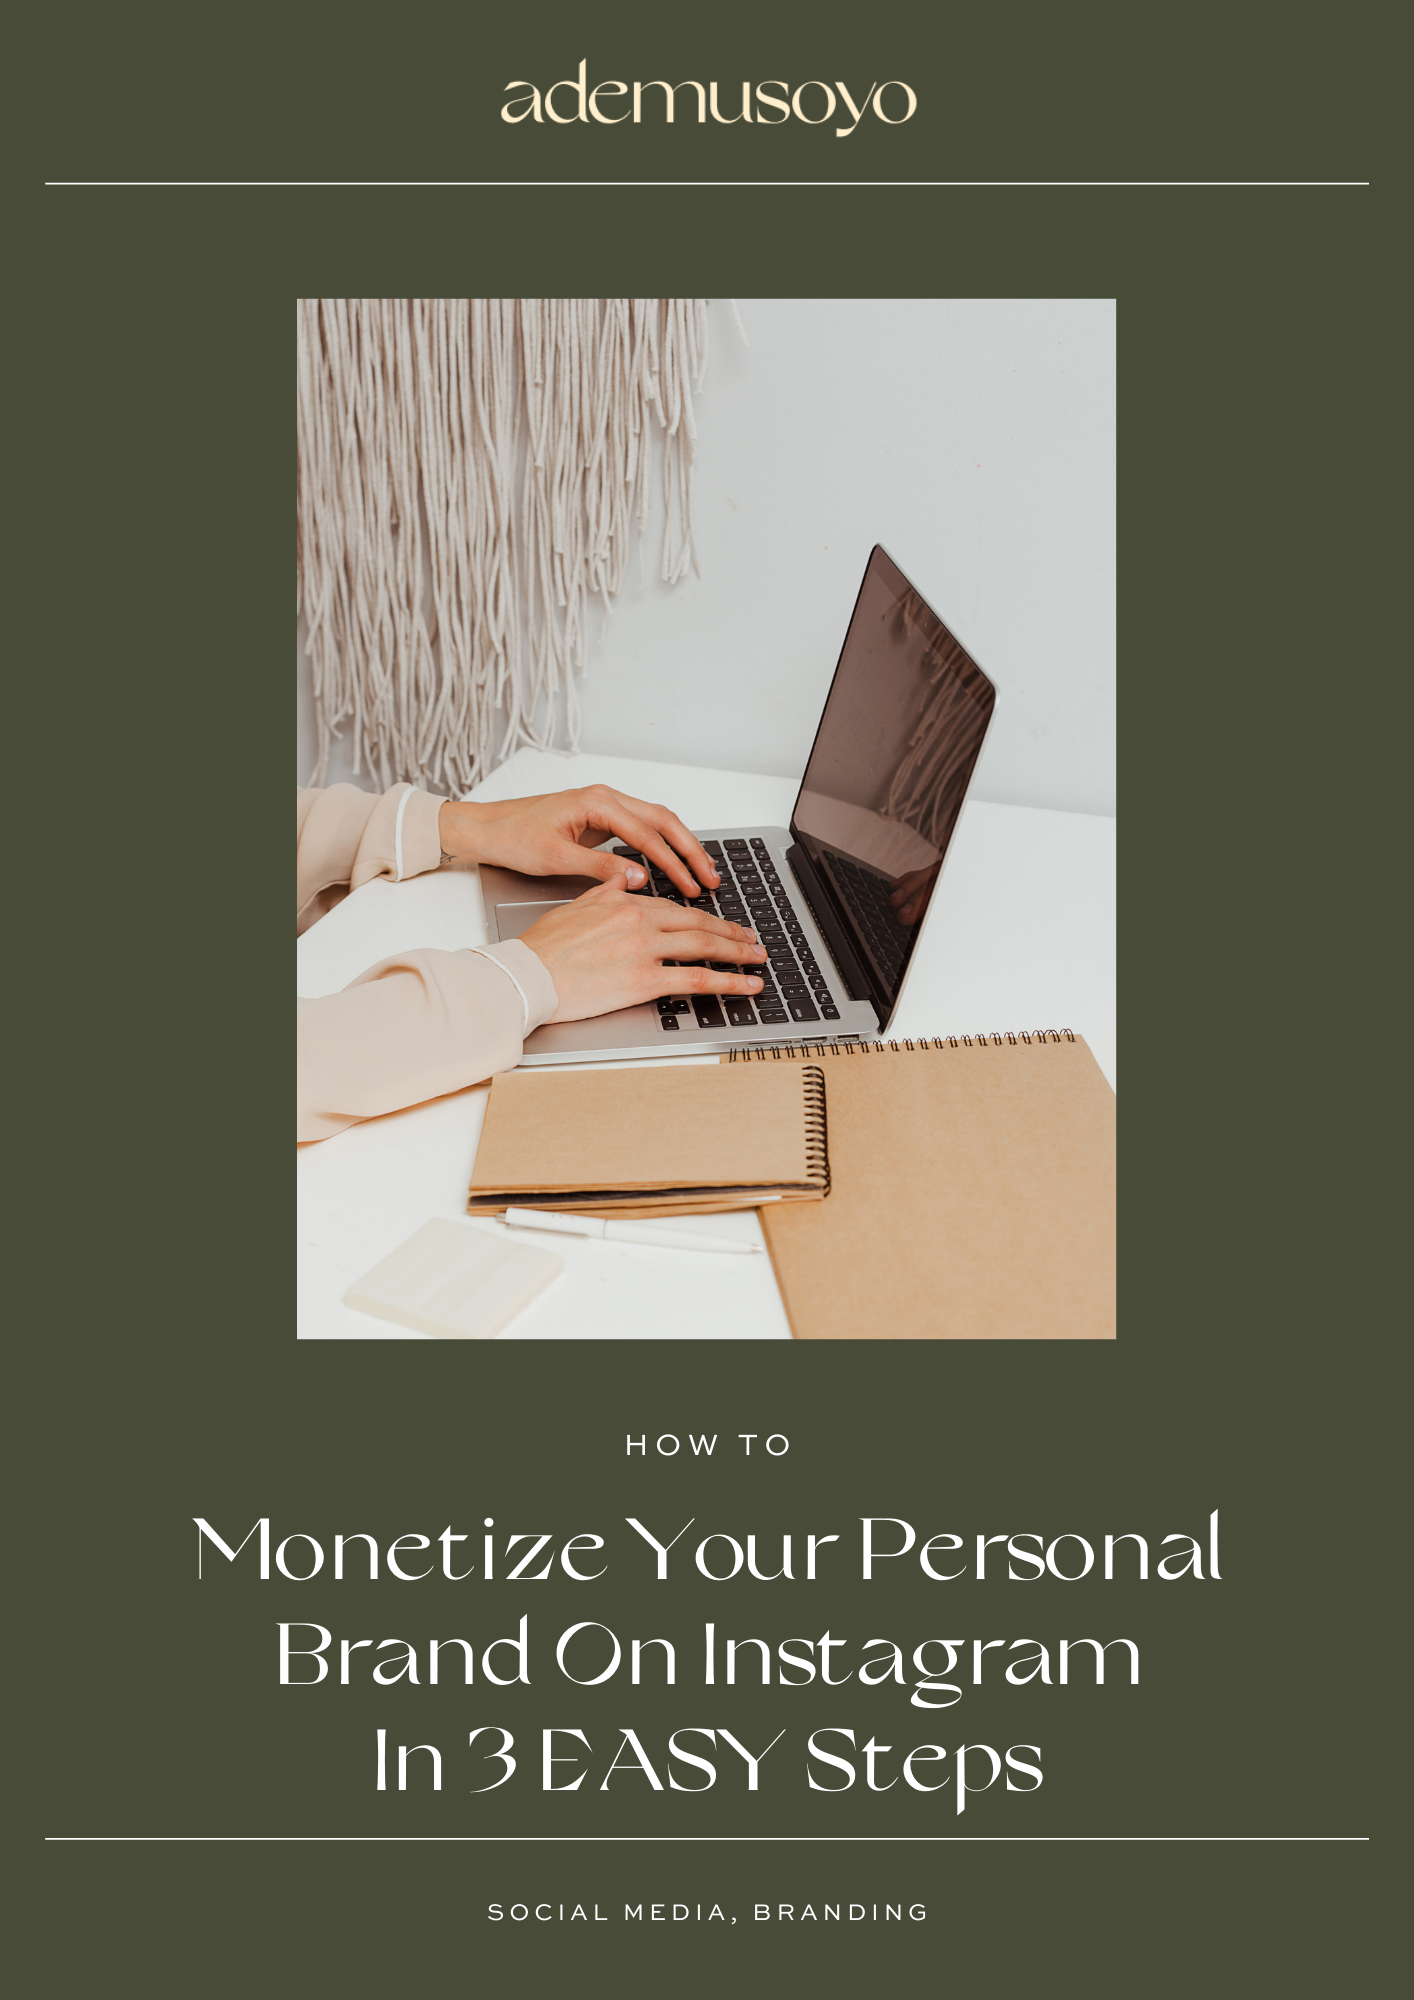 How To Monetize Your Personal Brand On Instagram In 3 EASY Steps